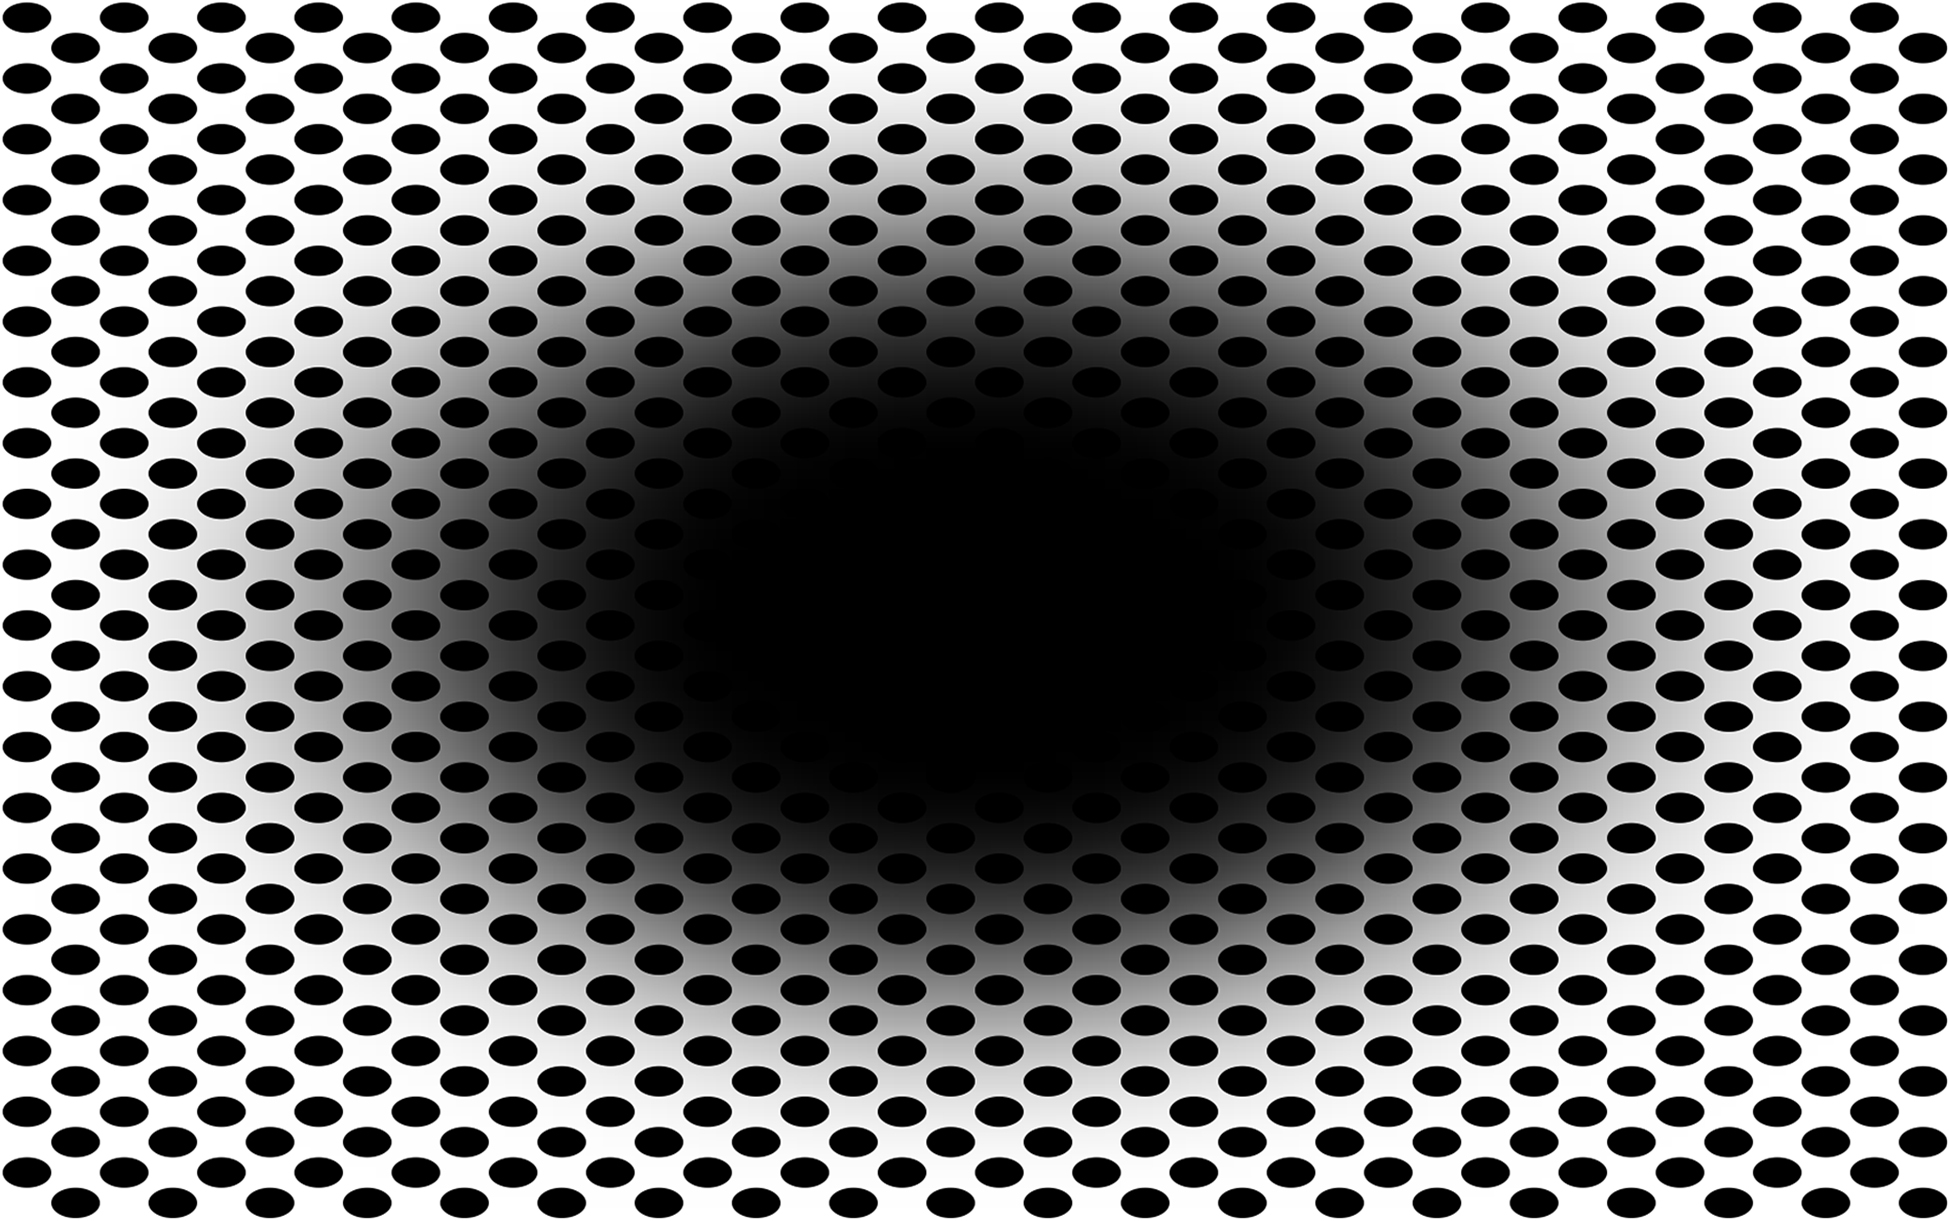 When the central stimulus in the photo above is black, the pupil expands; when it's white, it constricts.